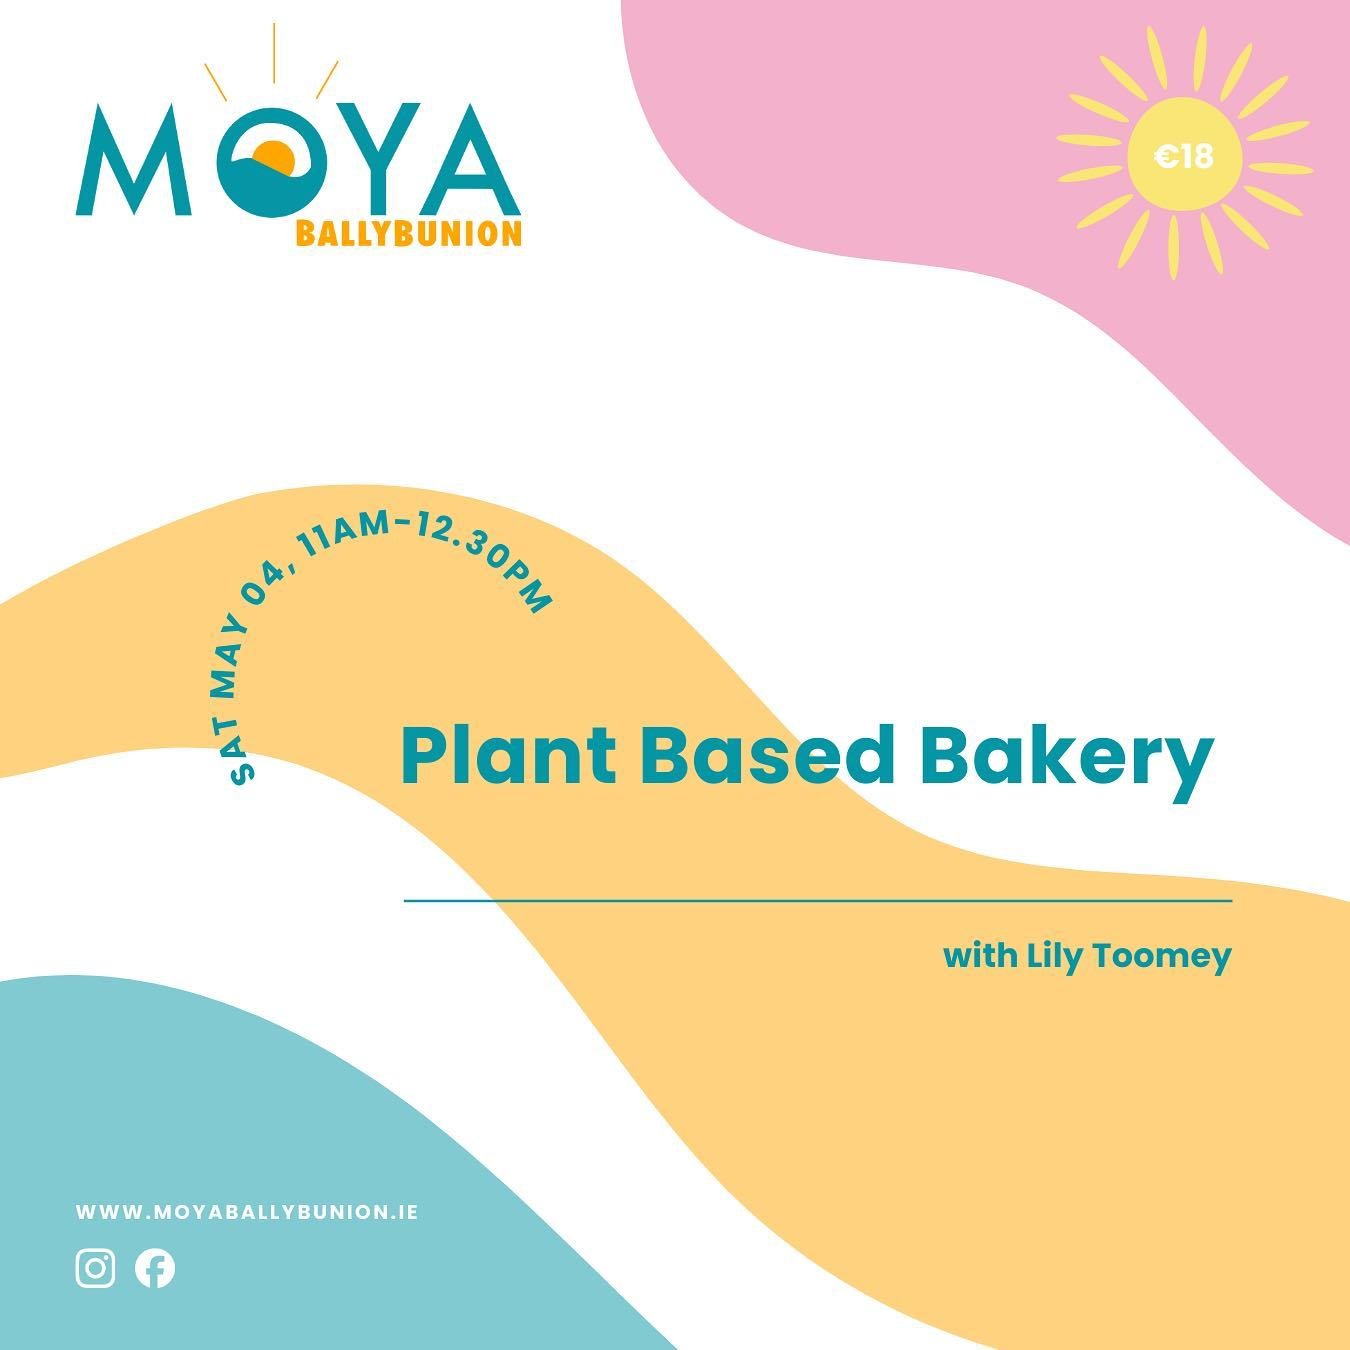 Plant Based Bakery &amp; Into to Foundational Vegan Recipes with Lily Toomey 🌱 
www.moyaballybunion.ie 
Saturday 4 May 2024
11:00  12:30
St Joseph&rsquo;s Secondary School, Ballybunion
🌱
Introduction to Foundational Vegan Recipes with Lily Toomey

